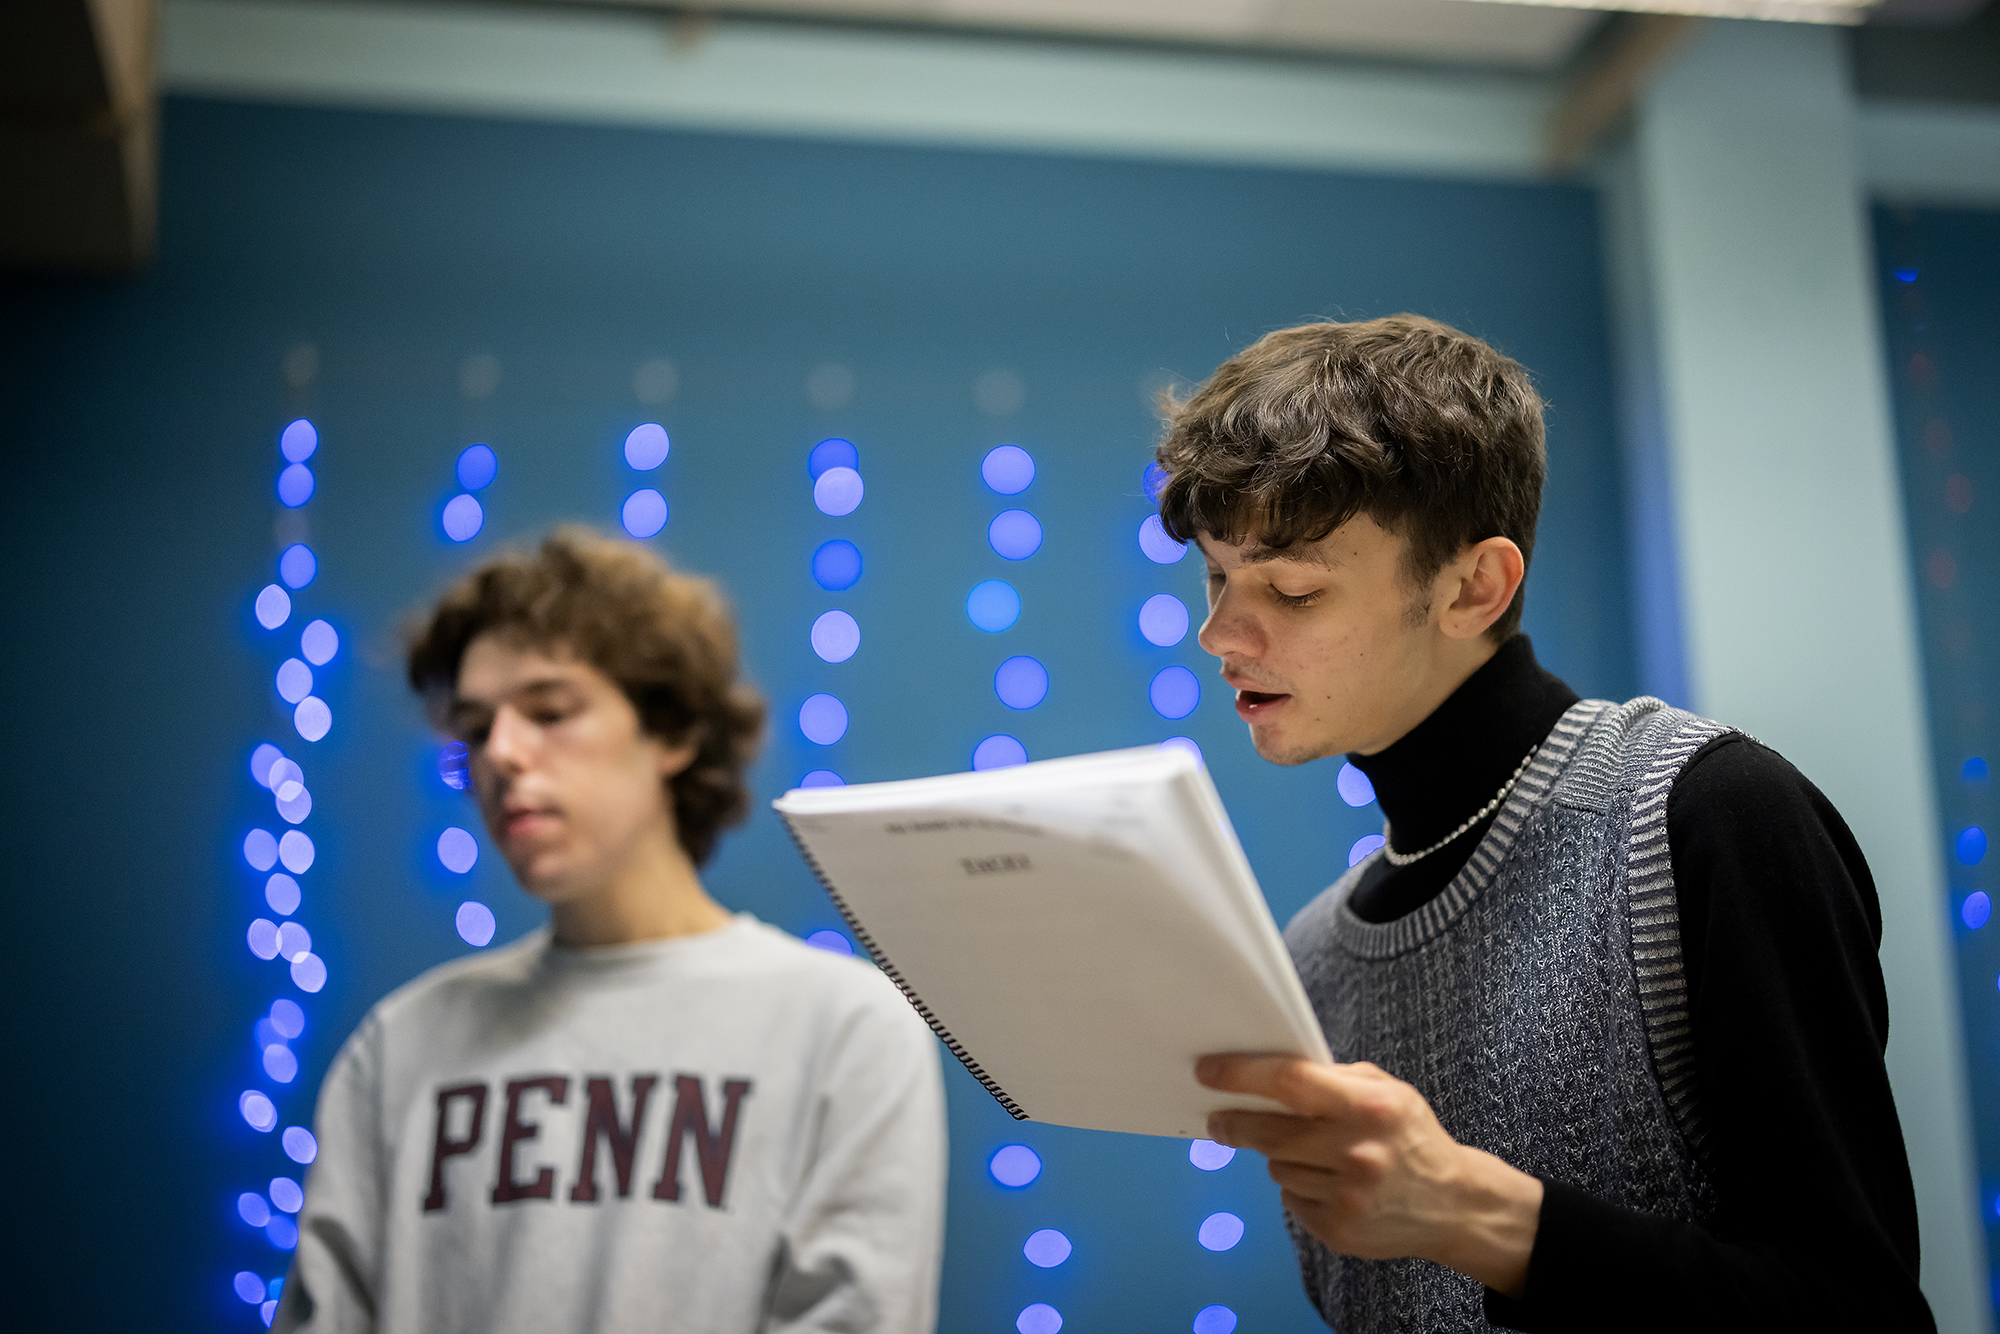 Two members of a Penn singing group rehearsing.